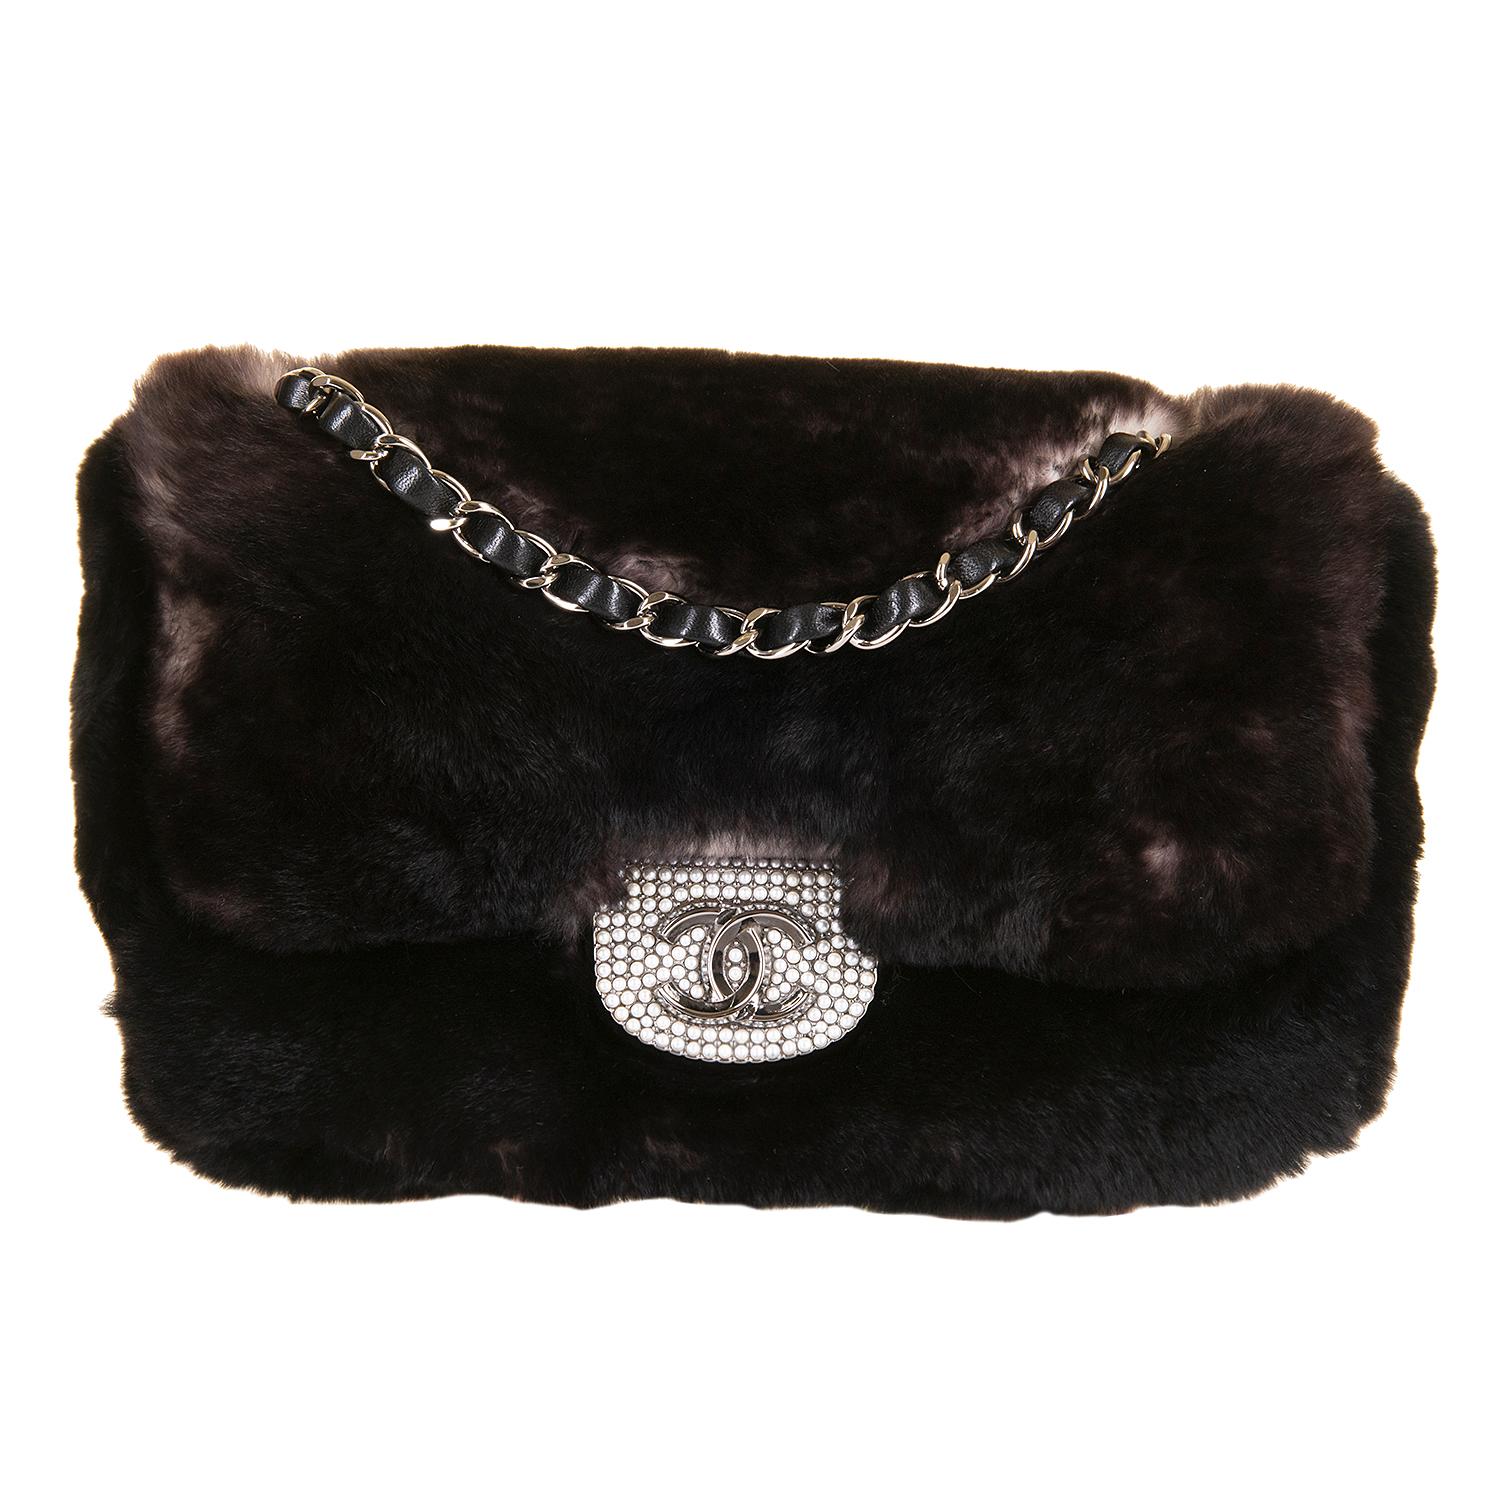 Black Stunning Chanel Runway 26cm 'Orylag' Fur Bag with Freshwater Pearl Clasp